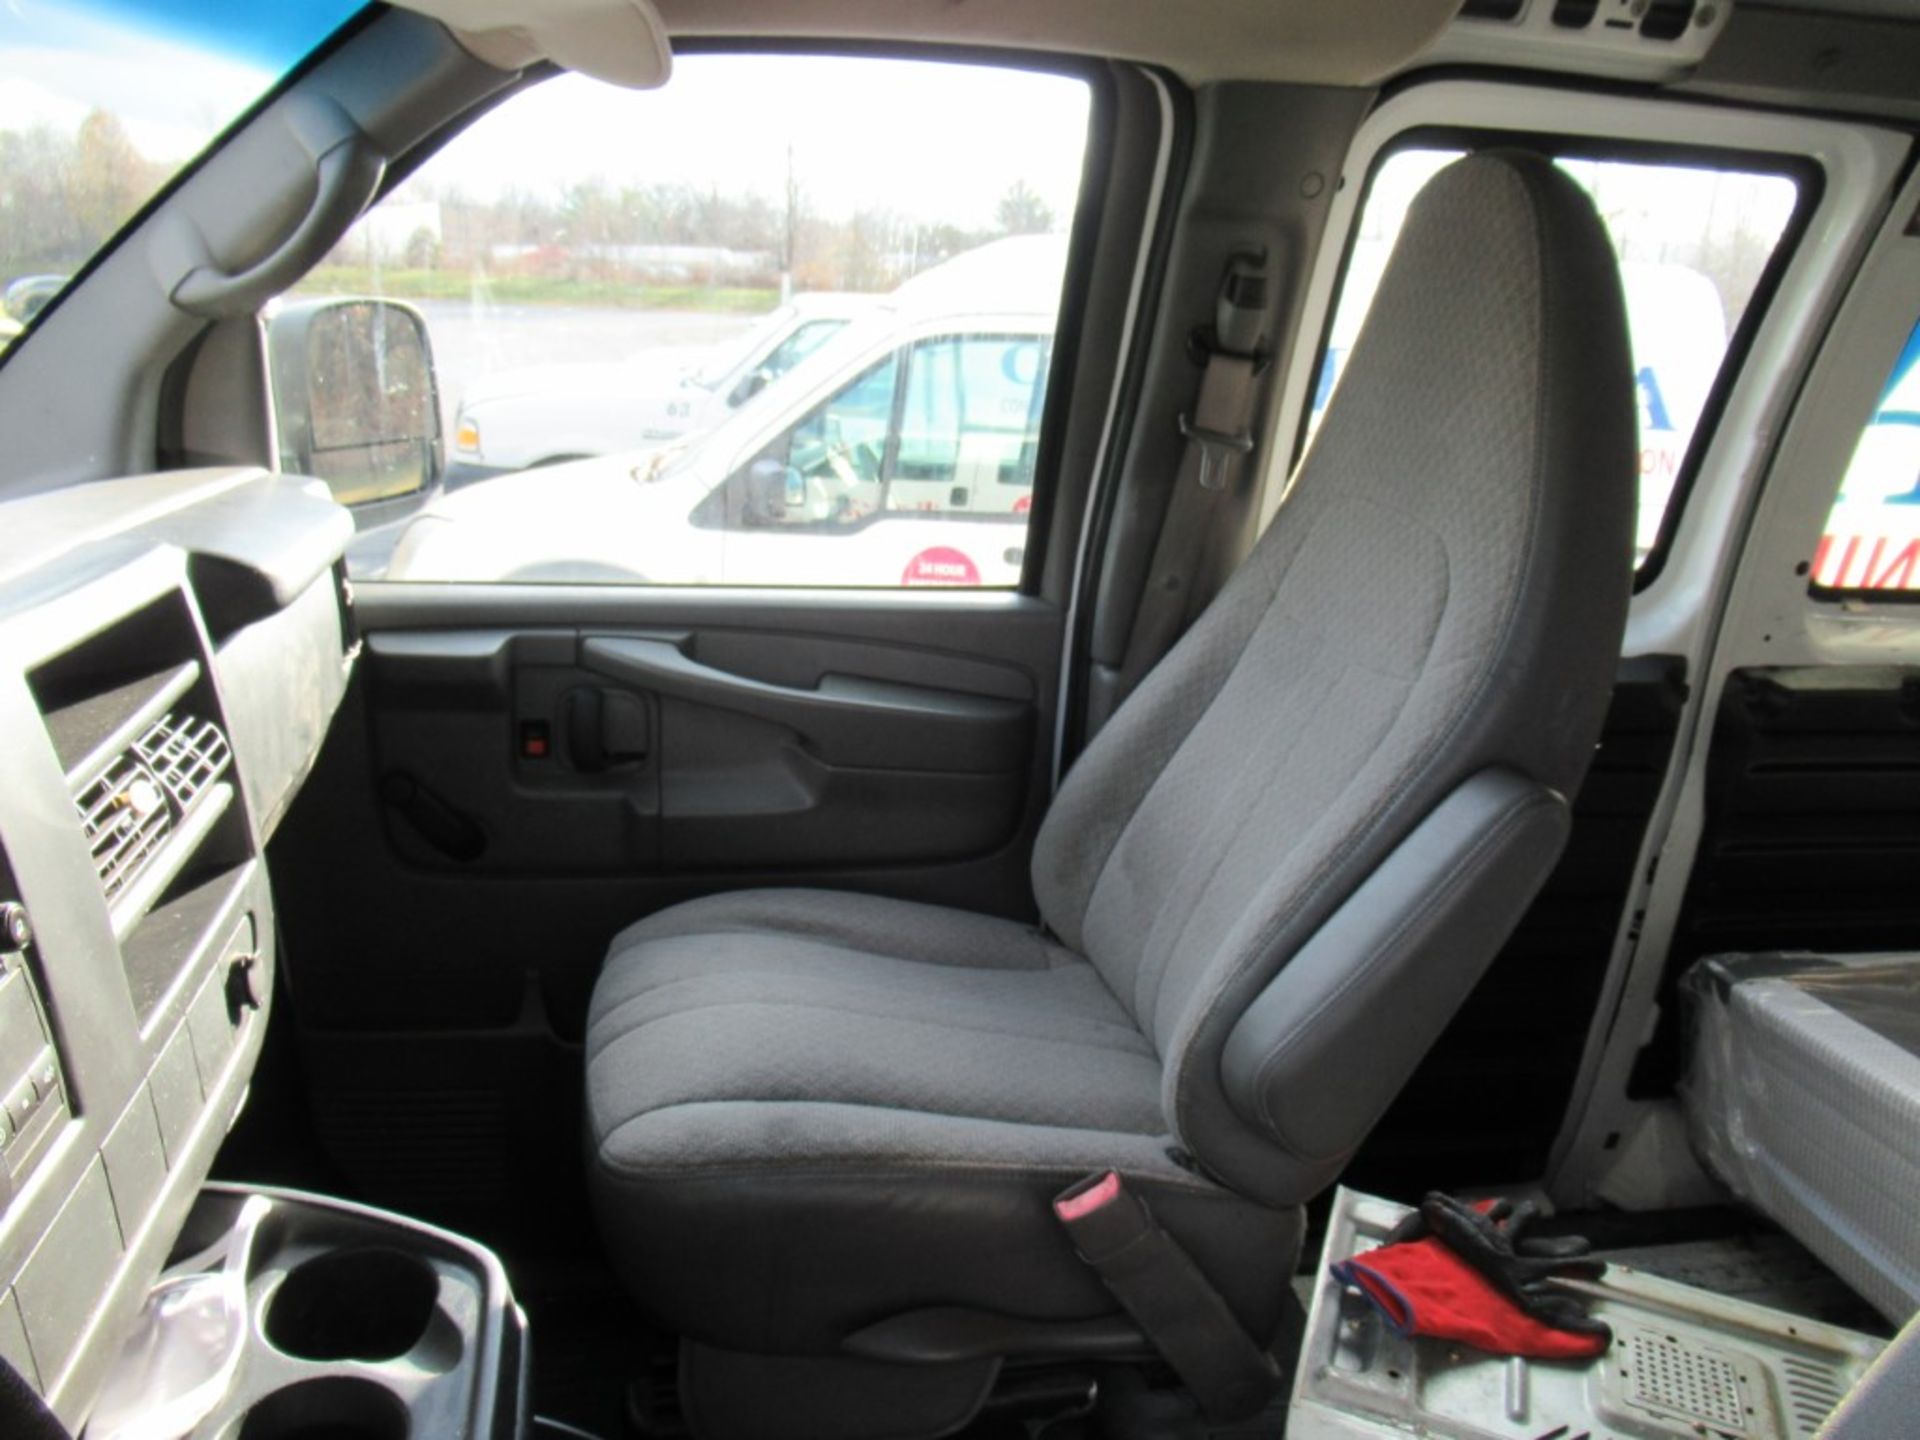 2012 Chevrolet Express Cargo Van, VIN 1GCWGGBA8C1154264, Automatic, AC, AM/FM, Towing, Cracked - Image 23 of 26